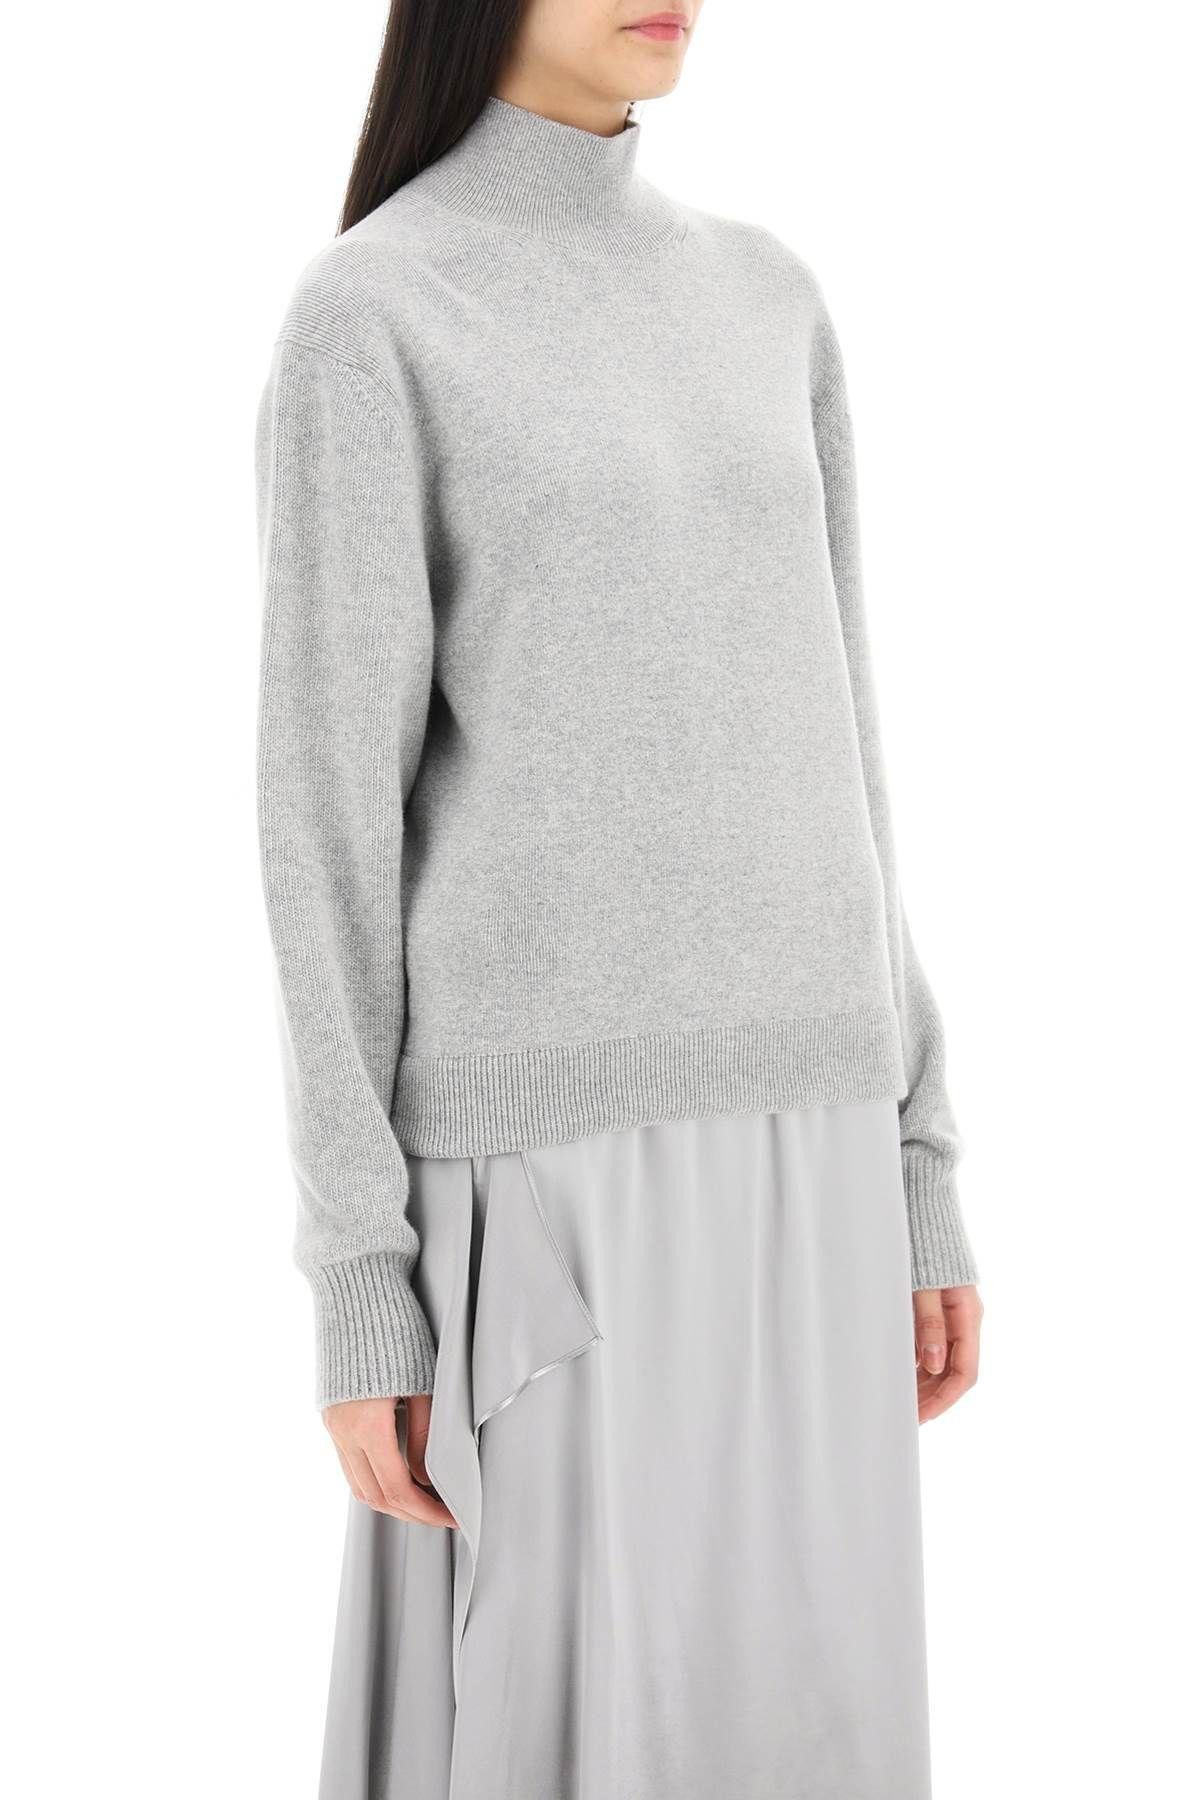 Fendi Wool and cashmere pullover 